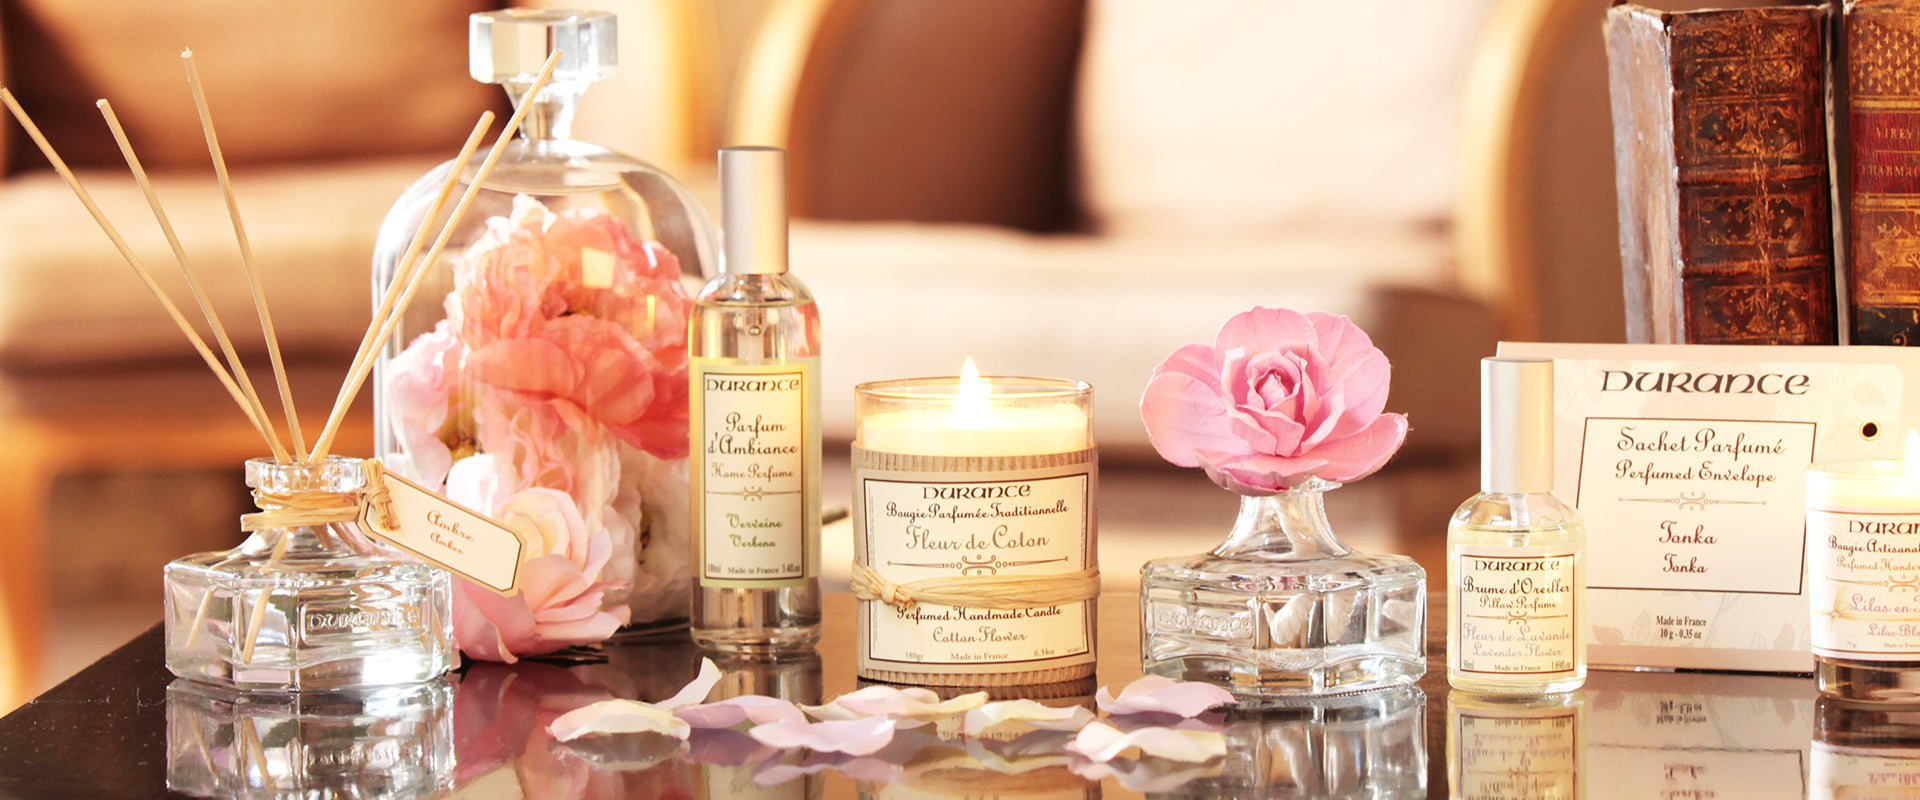 Durance home fragrance range, has flowers, candles and pillow spray. The table is warmly lit with petals over it. 